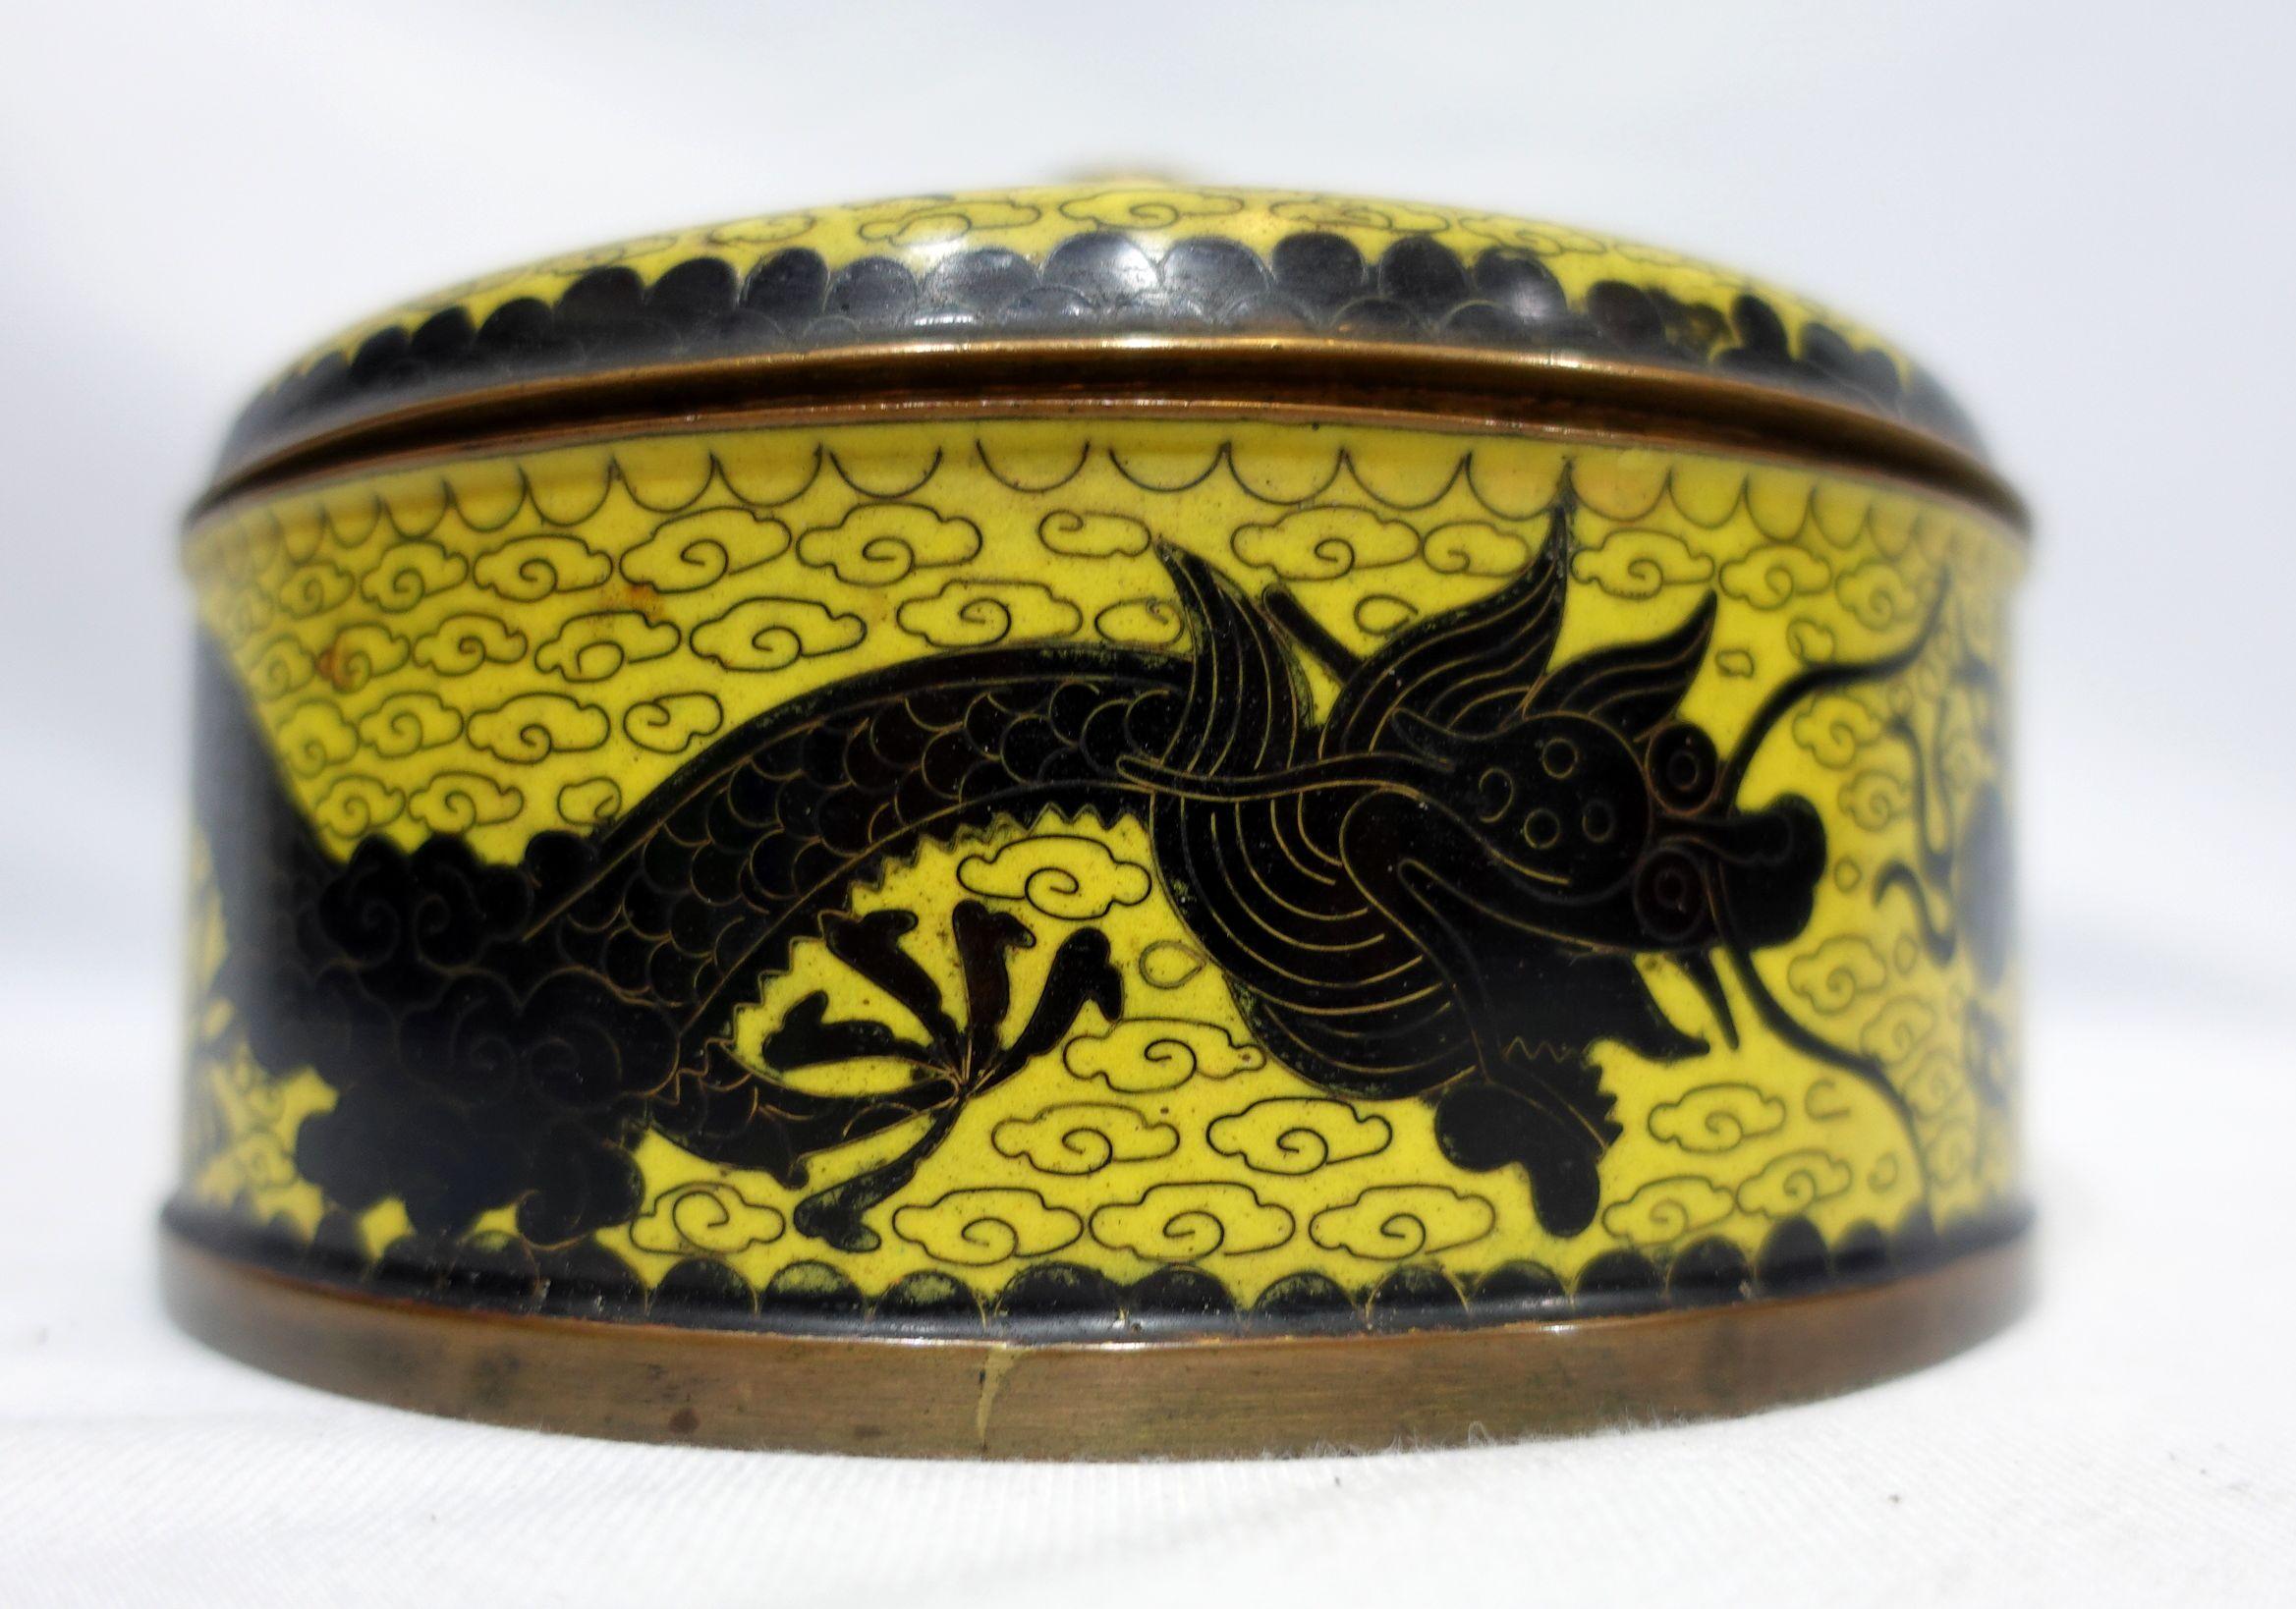 Antique Chinese cloisonné enamel round box with lid depicting flying dragons chasing fireballs. Yellow base and dark dragon color are applied, and 3 compartments are inside. From the 19th century.
4.5